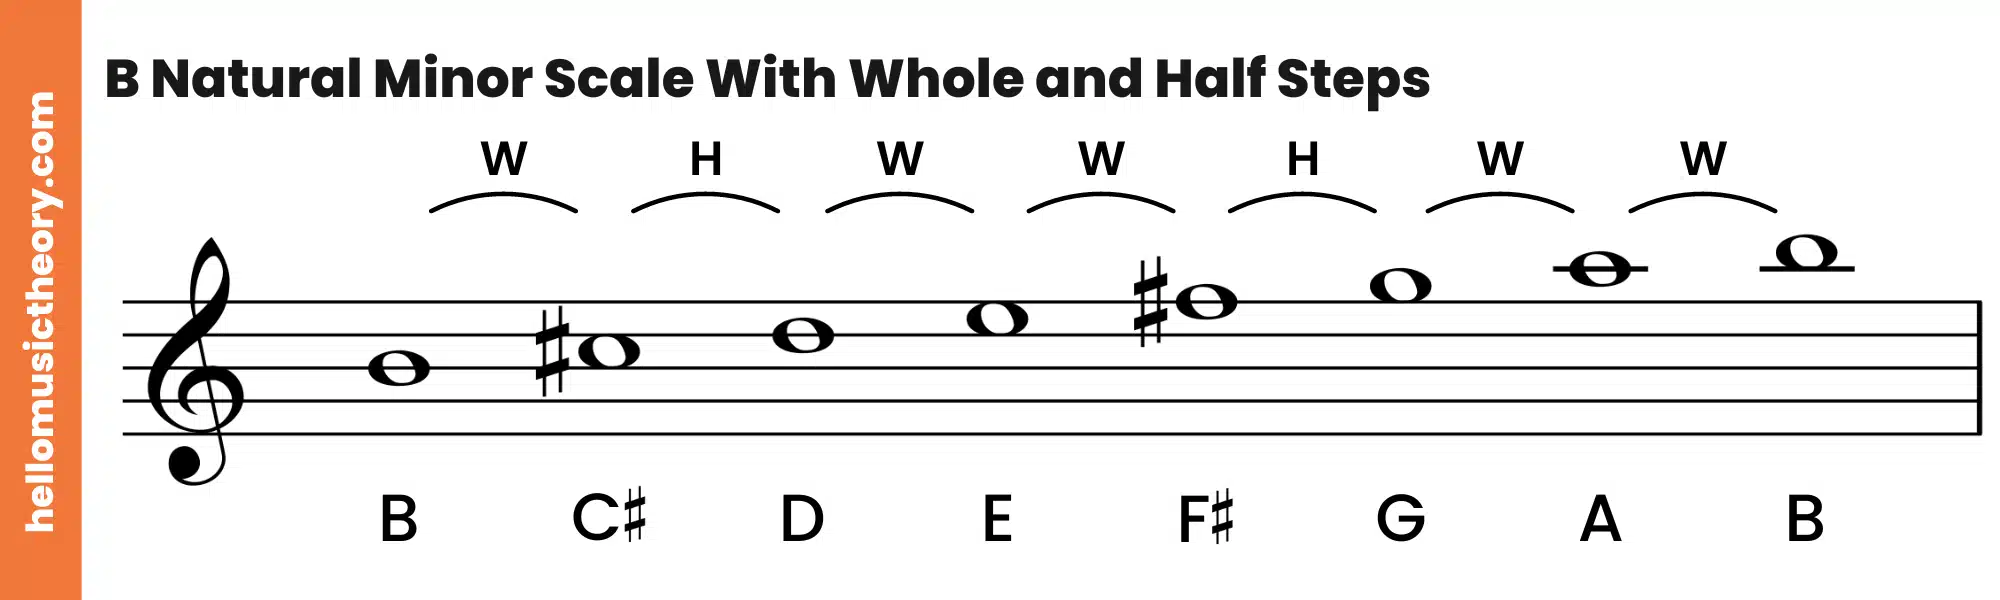 B Natural Minor Scale Treble Clef Ascending With Whole and Half Steps